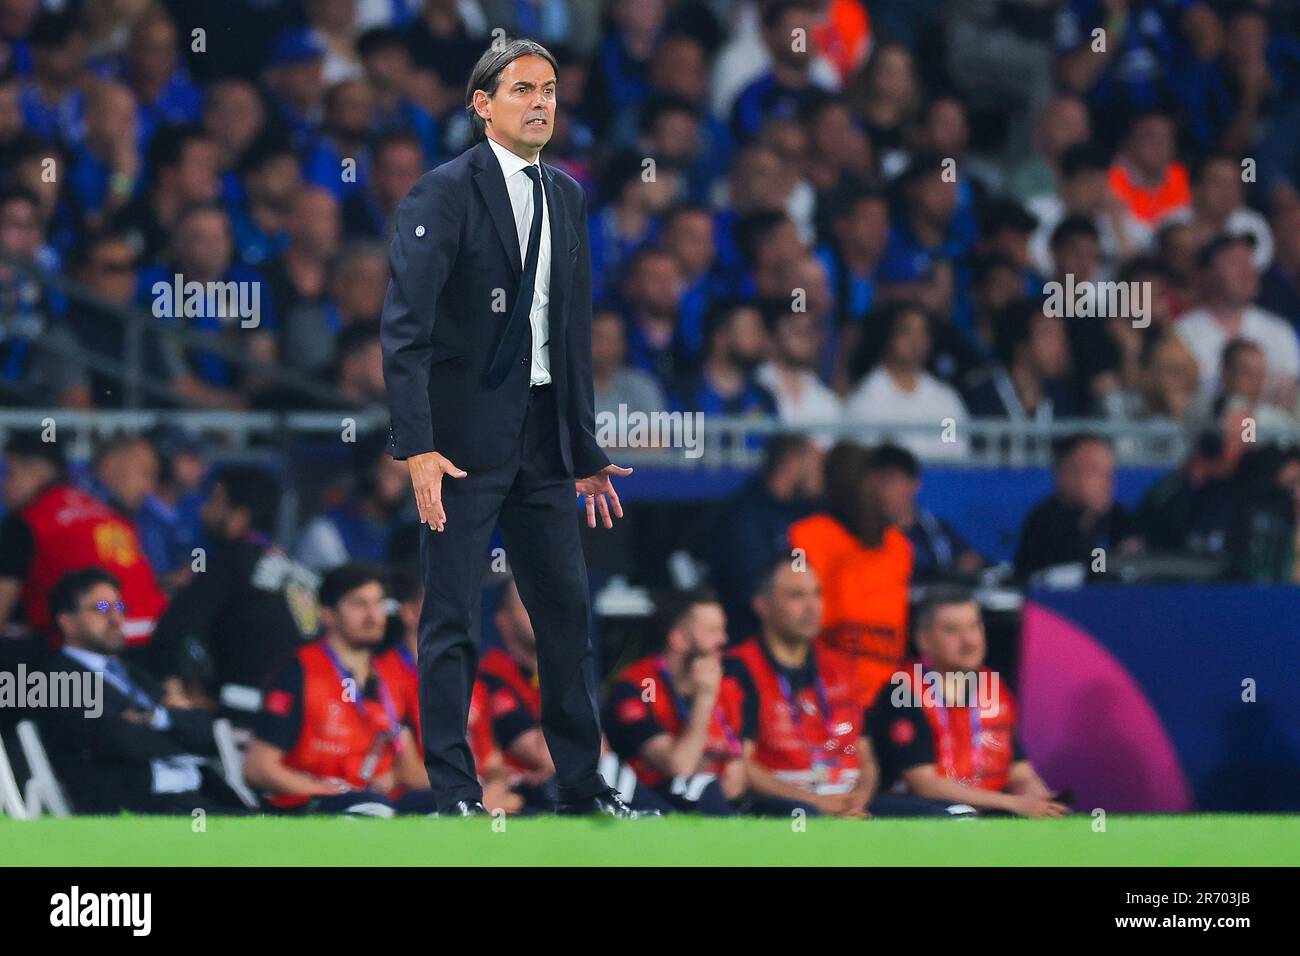 Istanbul, Turkey. 10th June, 2023. ISTANBUL, TURKEY - JUNE 10: coach Simone Inzaghi of FC Internazionale Milano during the UEFA Champions League Final match between Manchester City FC and FC Internazionale Milano at Ataturk Olympic Stadium on June 10, 2023 in Istanbul, Turkey (Photo by /Orange Pictures) Credit: Orange Pics BV/Alamy Live News Stock Photo